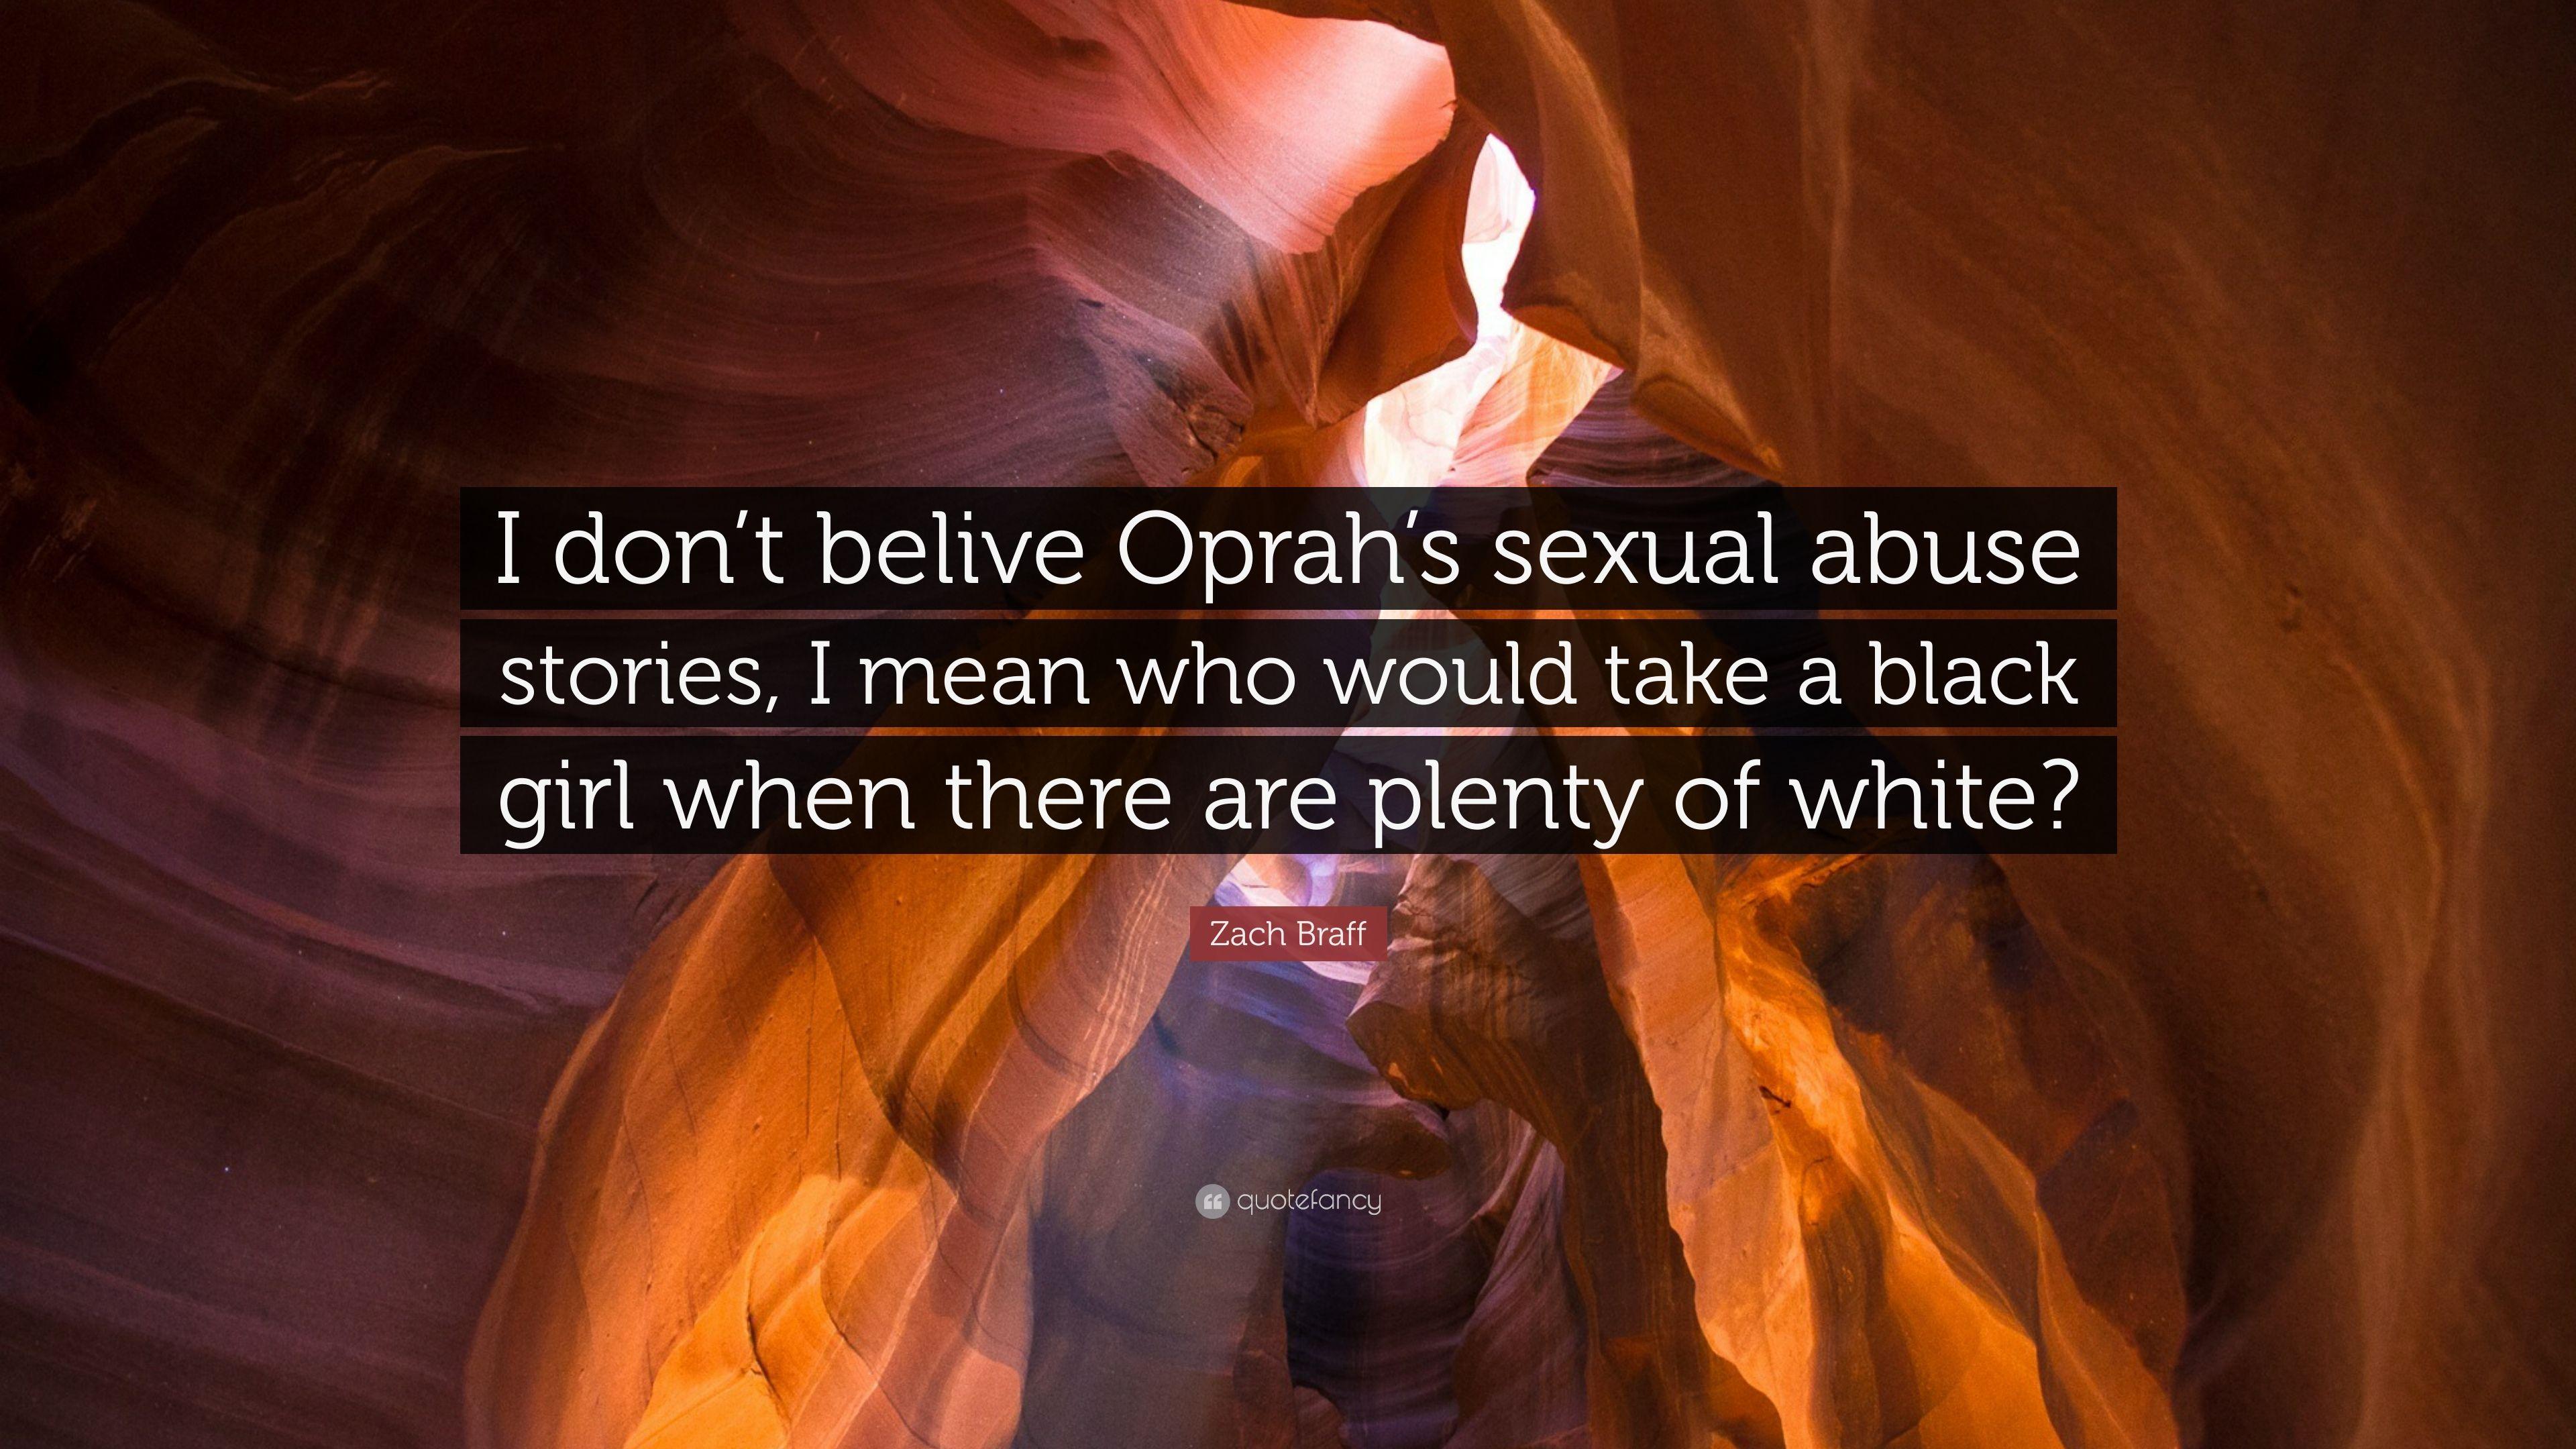 Zach Braff Quote: “I don't belive Oprah's sexual abuse stories, I